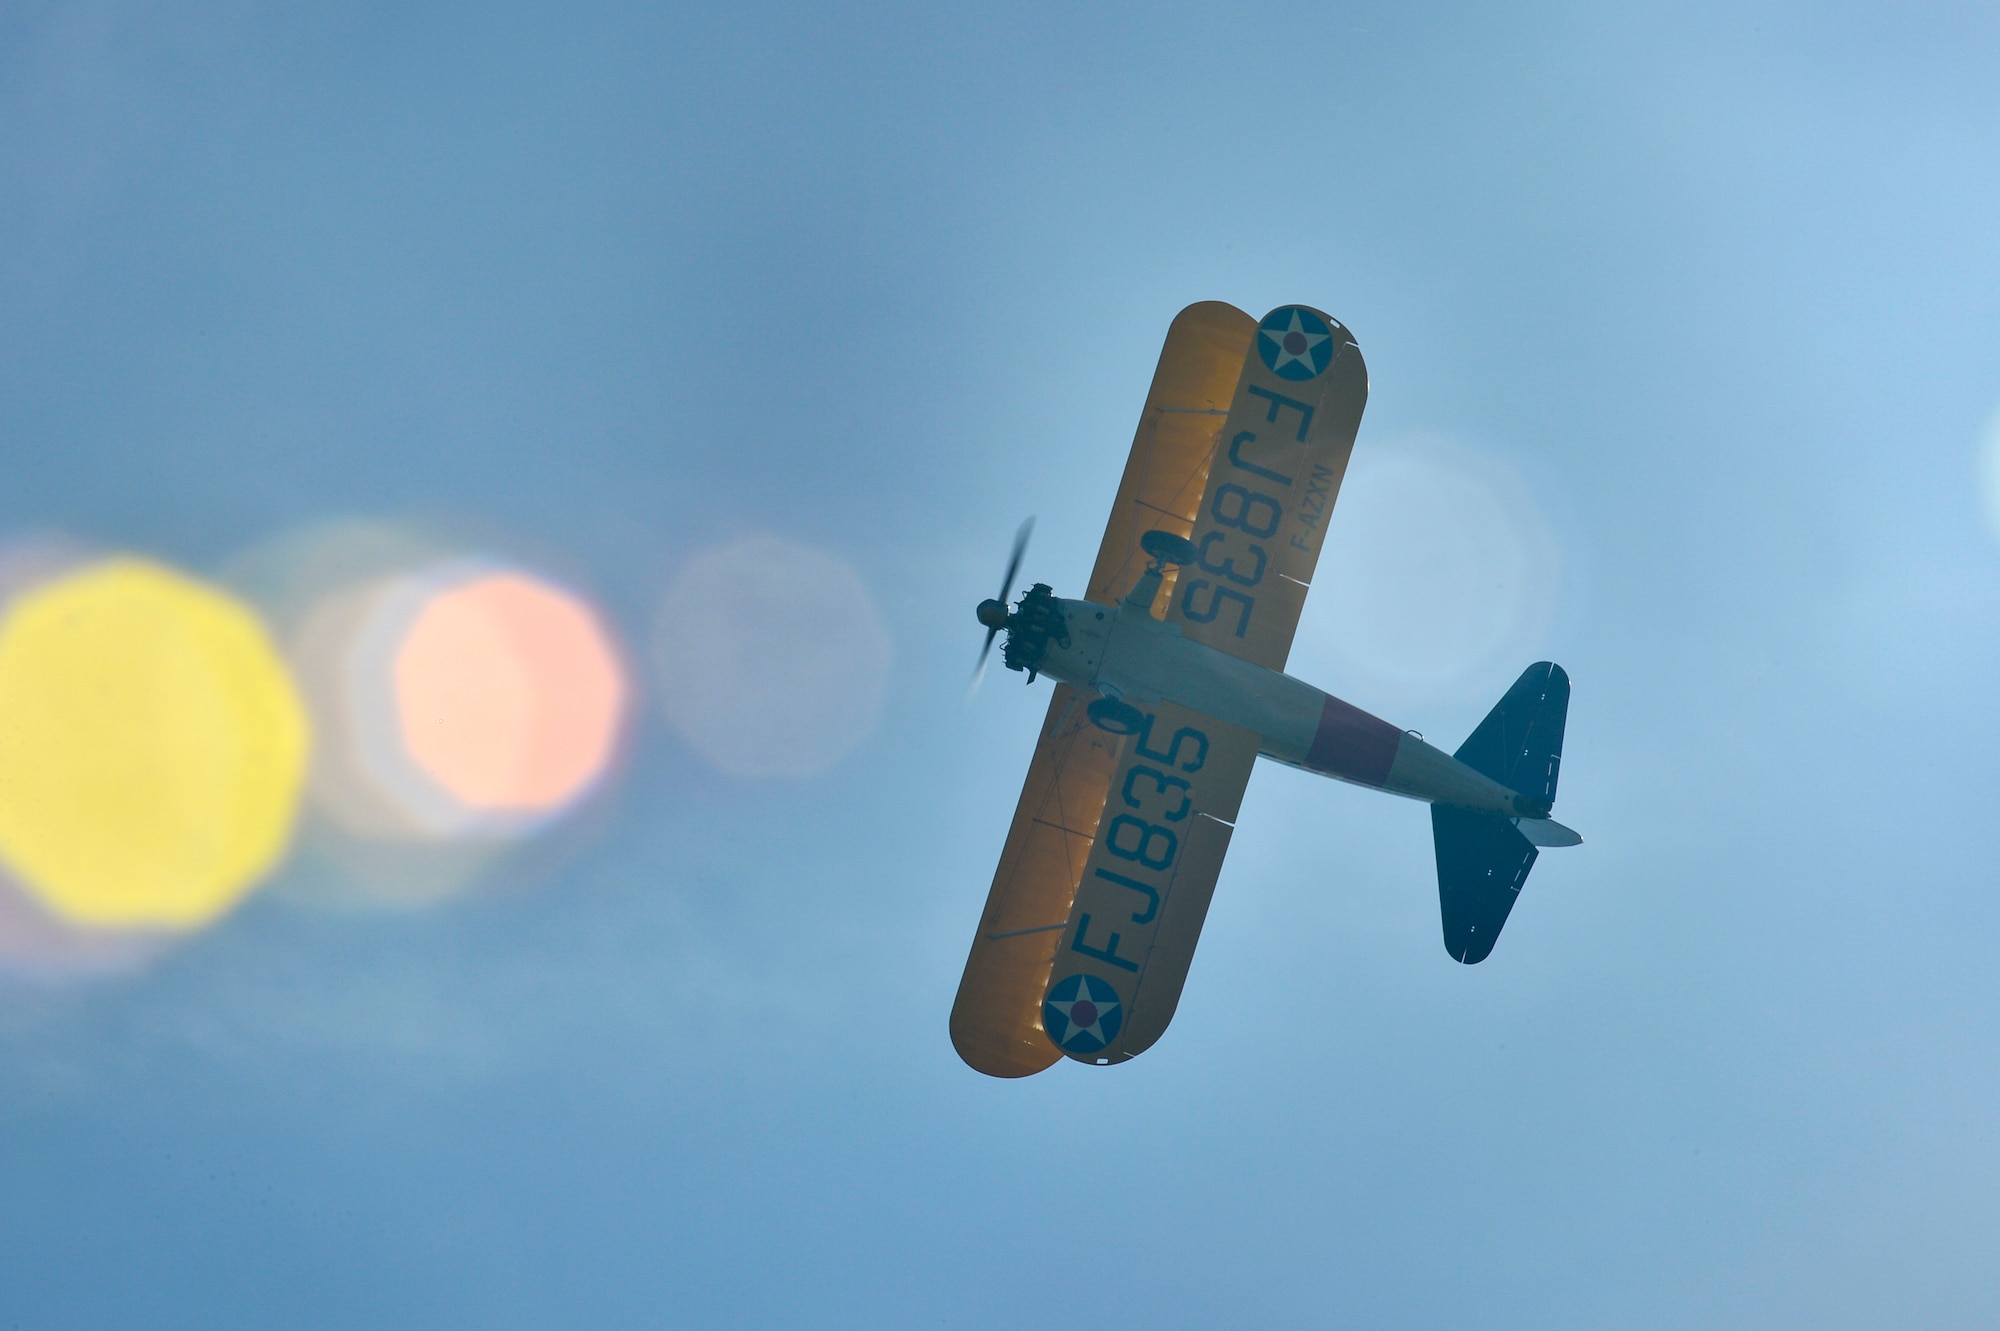 PARIS – A World War I-era Stearman PT-17 biplane flies over the Lafayette Escadrille Memorial in Marnes-la-Coquette, France, April 20, 2016, during a ceremony honoring the 268 Americans who joined the French Air Force before the U.S. officially engaged in World War I. In addition to the Stearman, four U.S. Air Force fifth generation F-22 Raptor fighters, a B-52 Stratofortress bomber, three FAF Mirage 2000Ns and one FAF Rafale performed flyovers during the ceremony commemorating the 100th anniversary of the Layfette Escadrille’s formation. Men of the Lafayette Escadrille and Lafayette Flying Crops were critical to the formation of the USAF. (U.S. Air Force Photo by Tech. Sgt. Joshua DeMotts/Released)